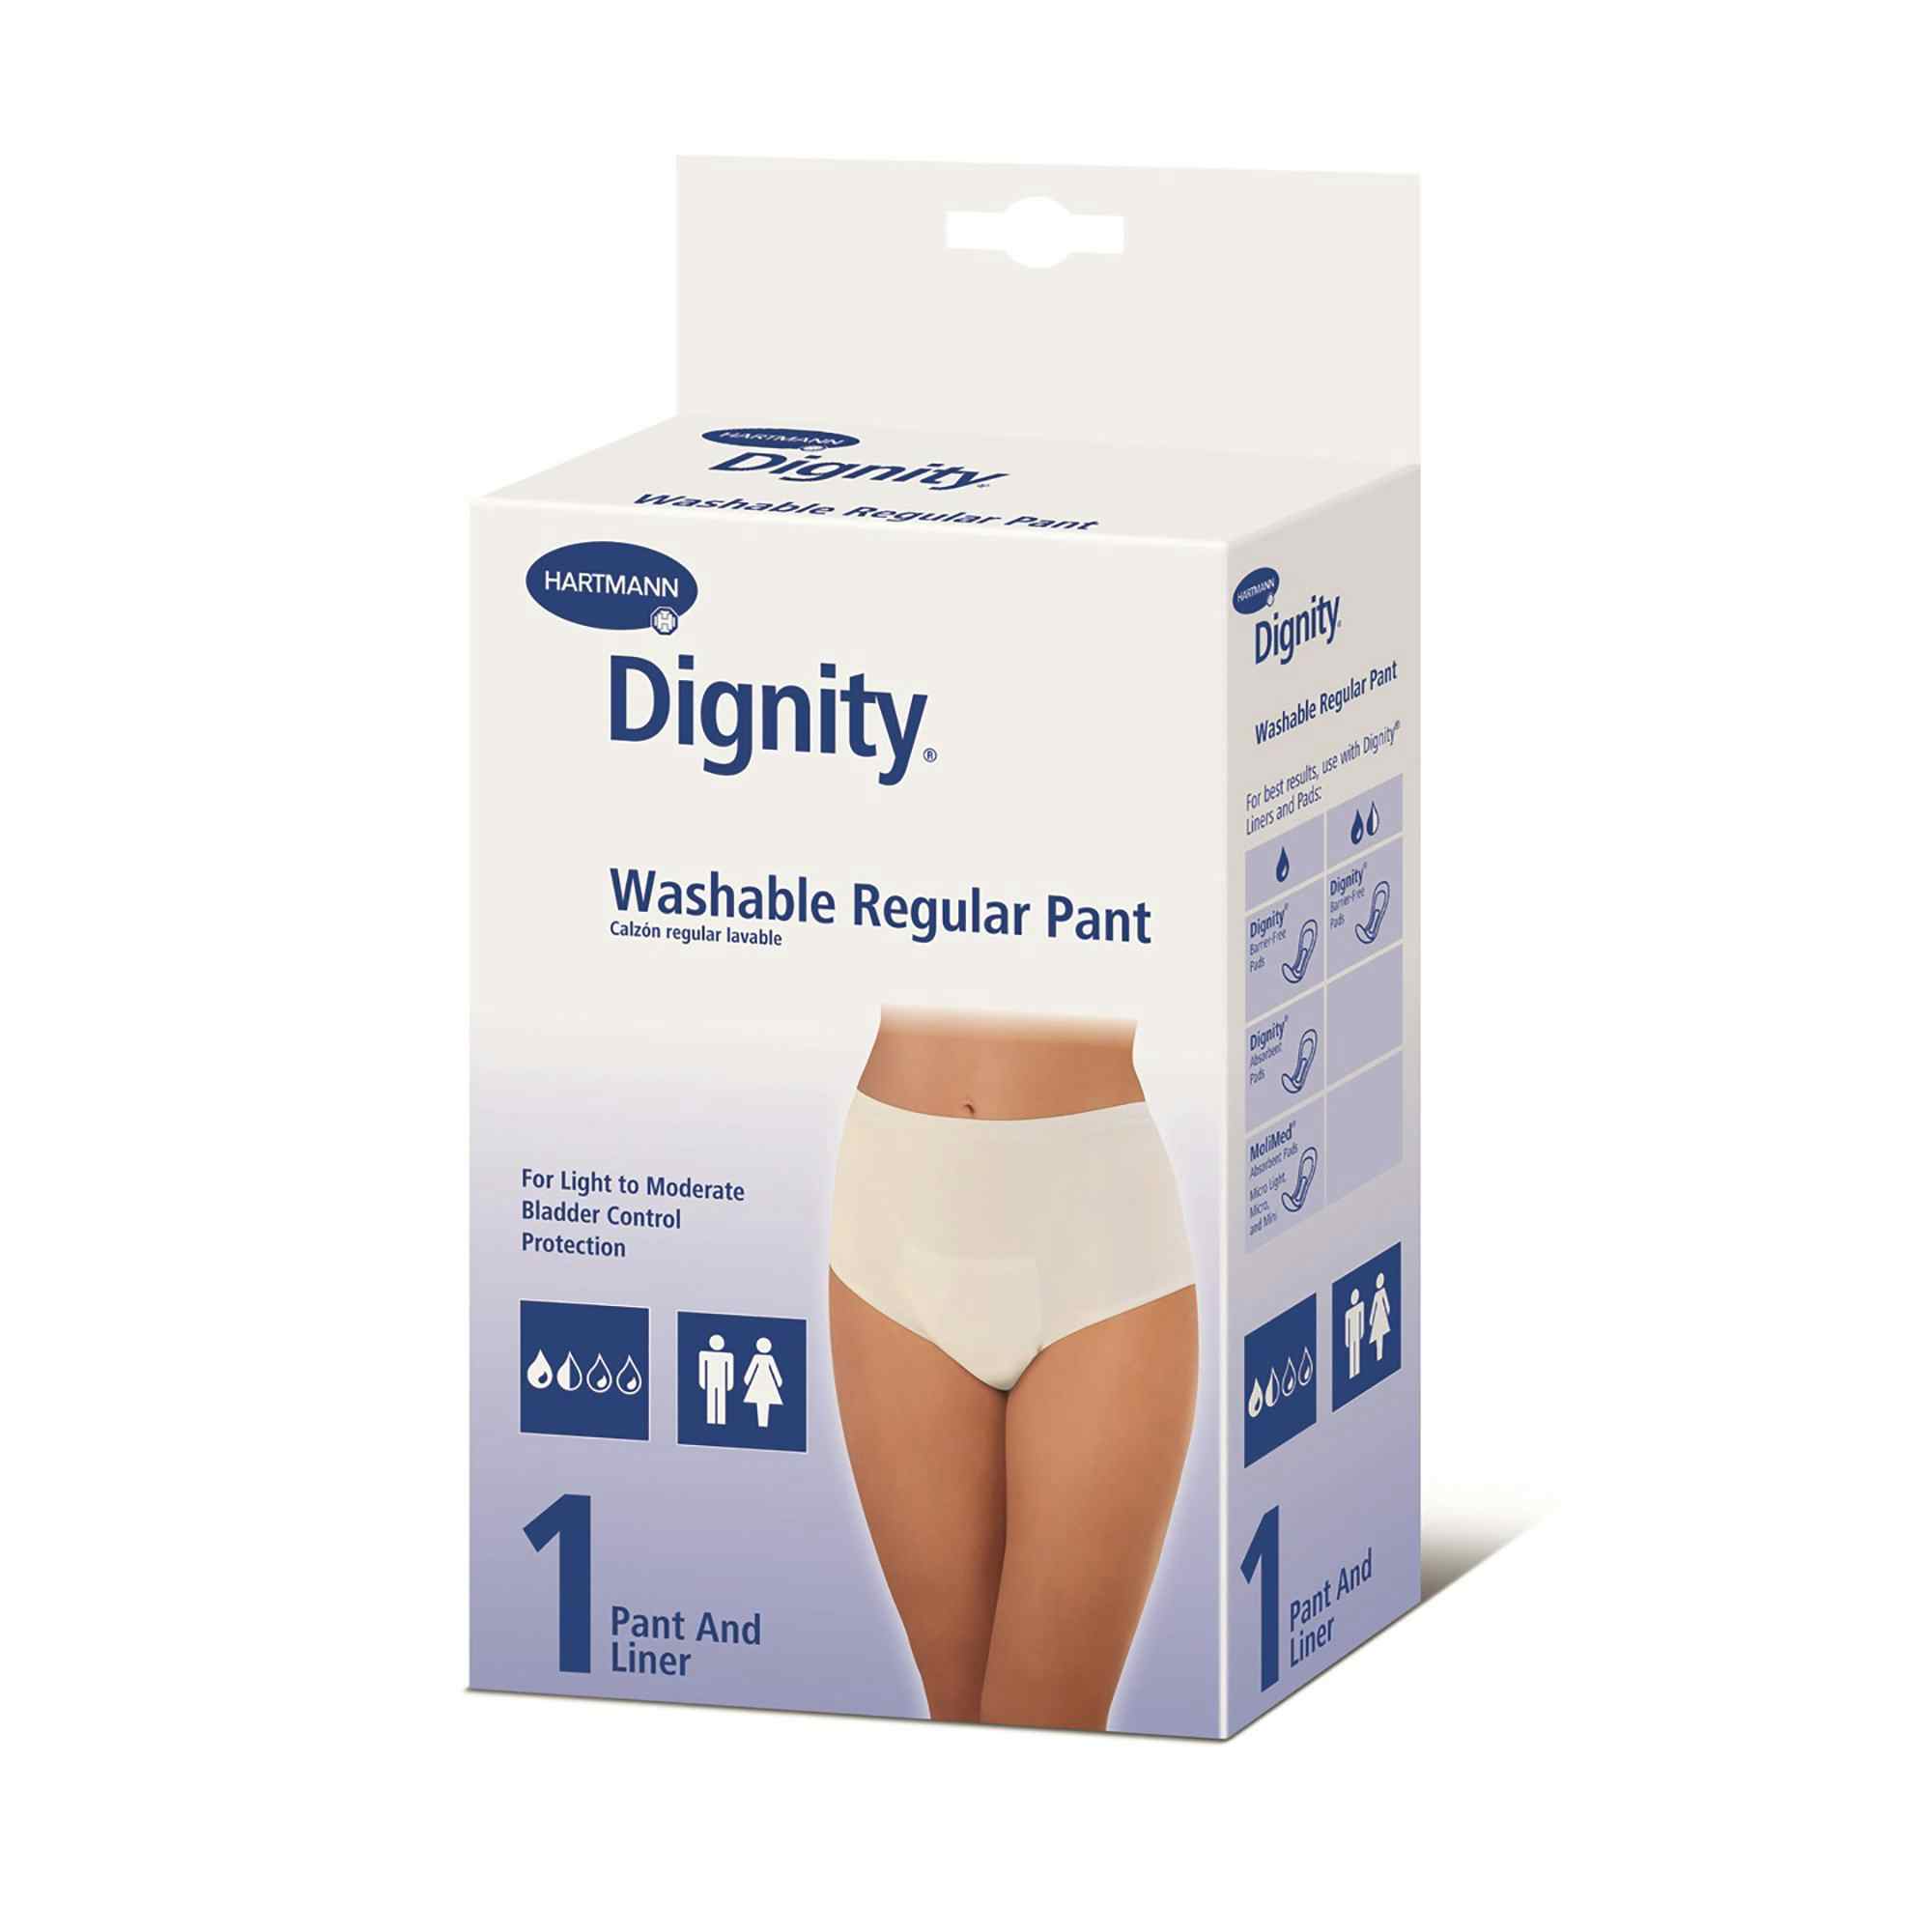 Dignity Unisex Pull On Reusable Protective Underwear with Liner, 16904, Large (42-47") - 1 Each